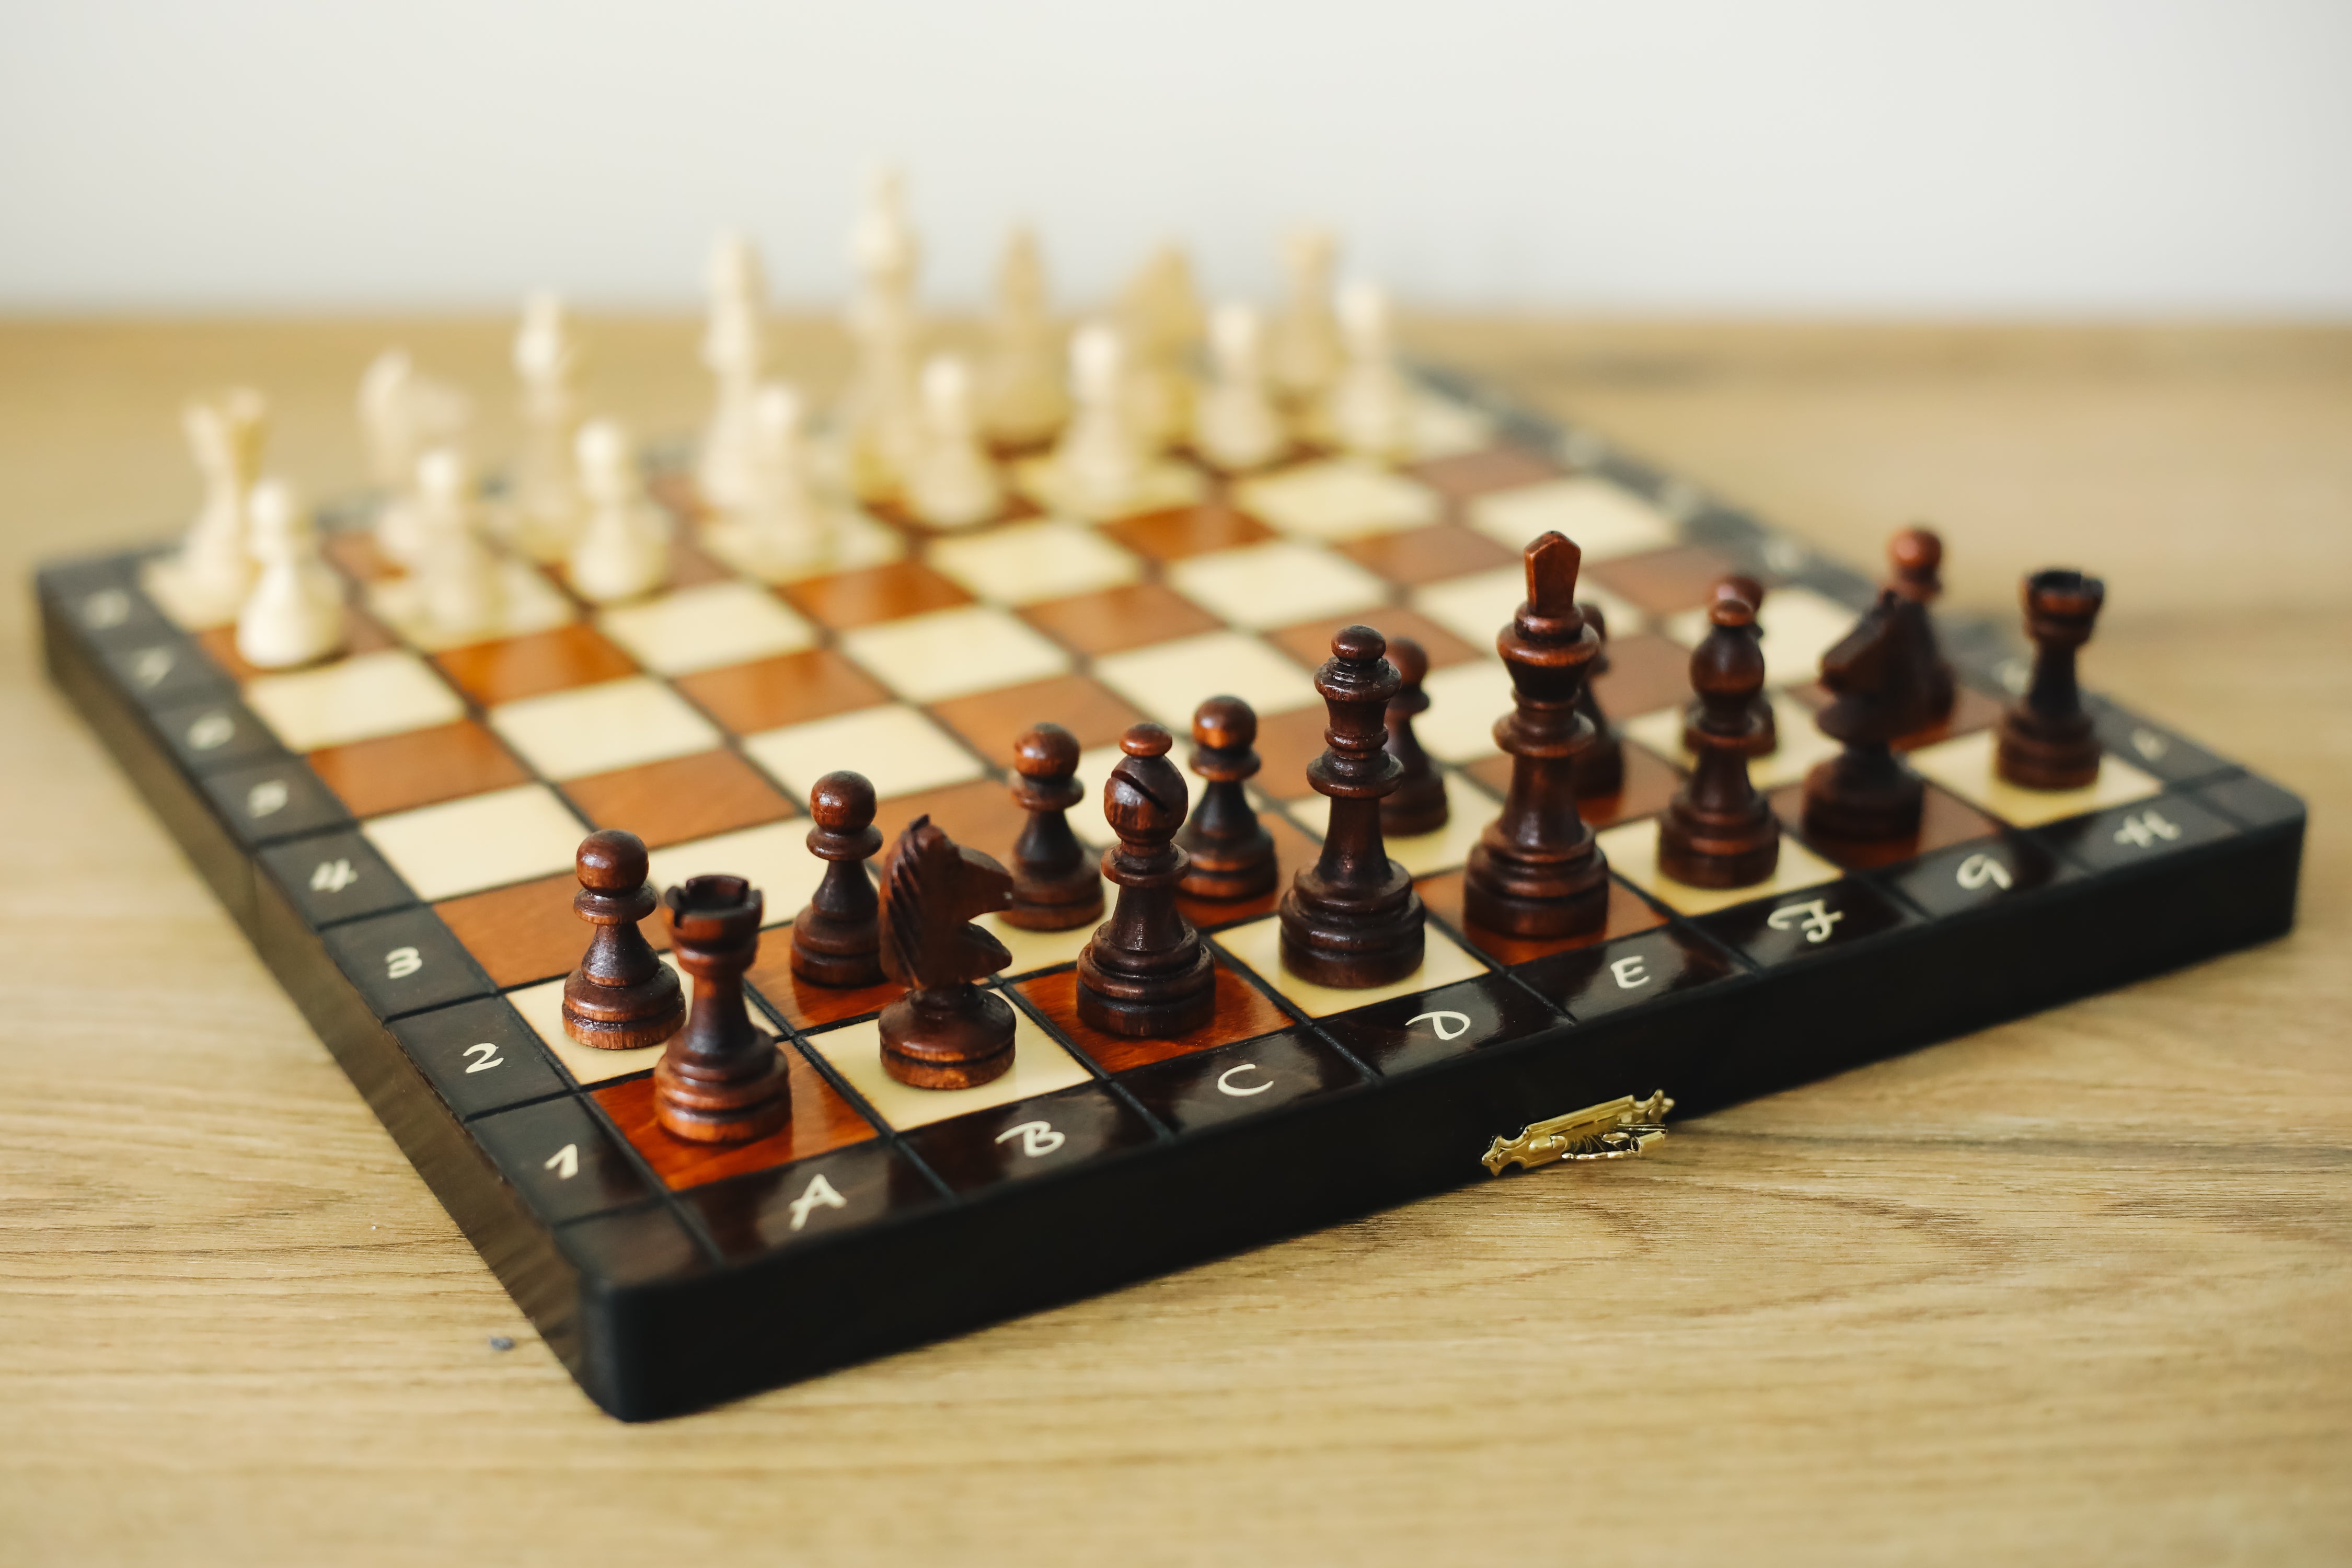 Classic wooden magnetic chess set - Board dimensions: 11x5.5x1.6 inch (280x140x40 mm) - Gift for Father's Day